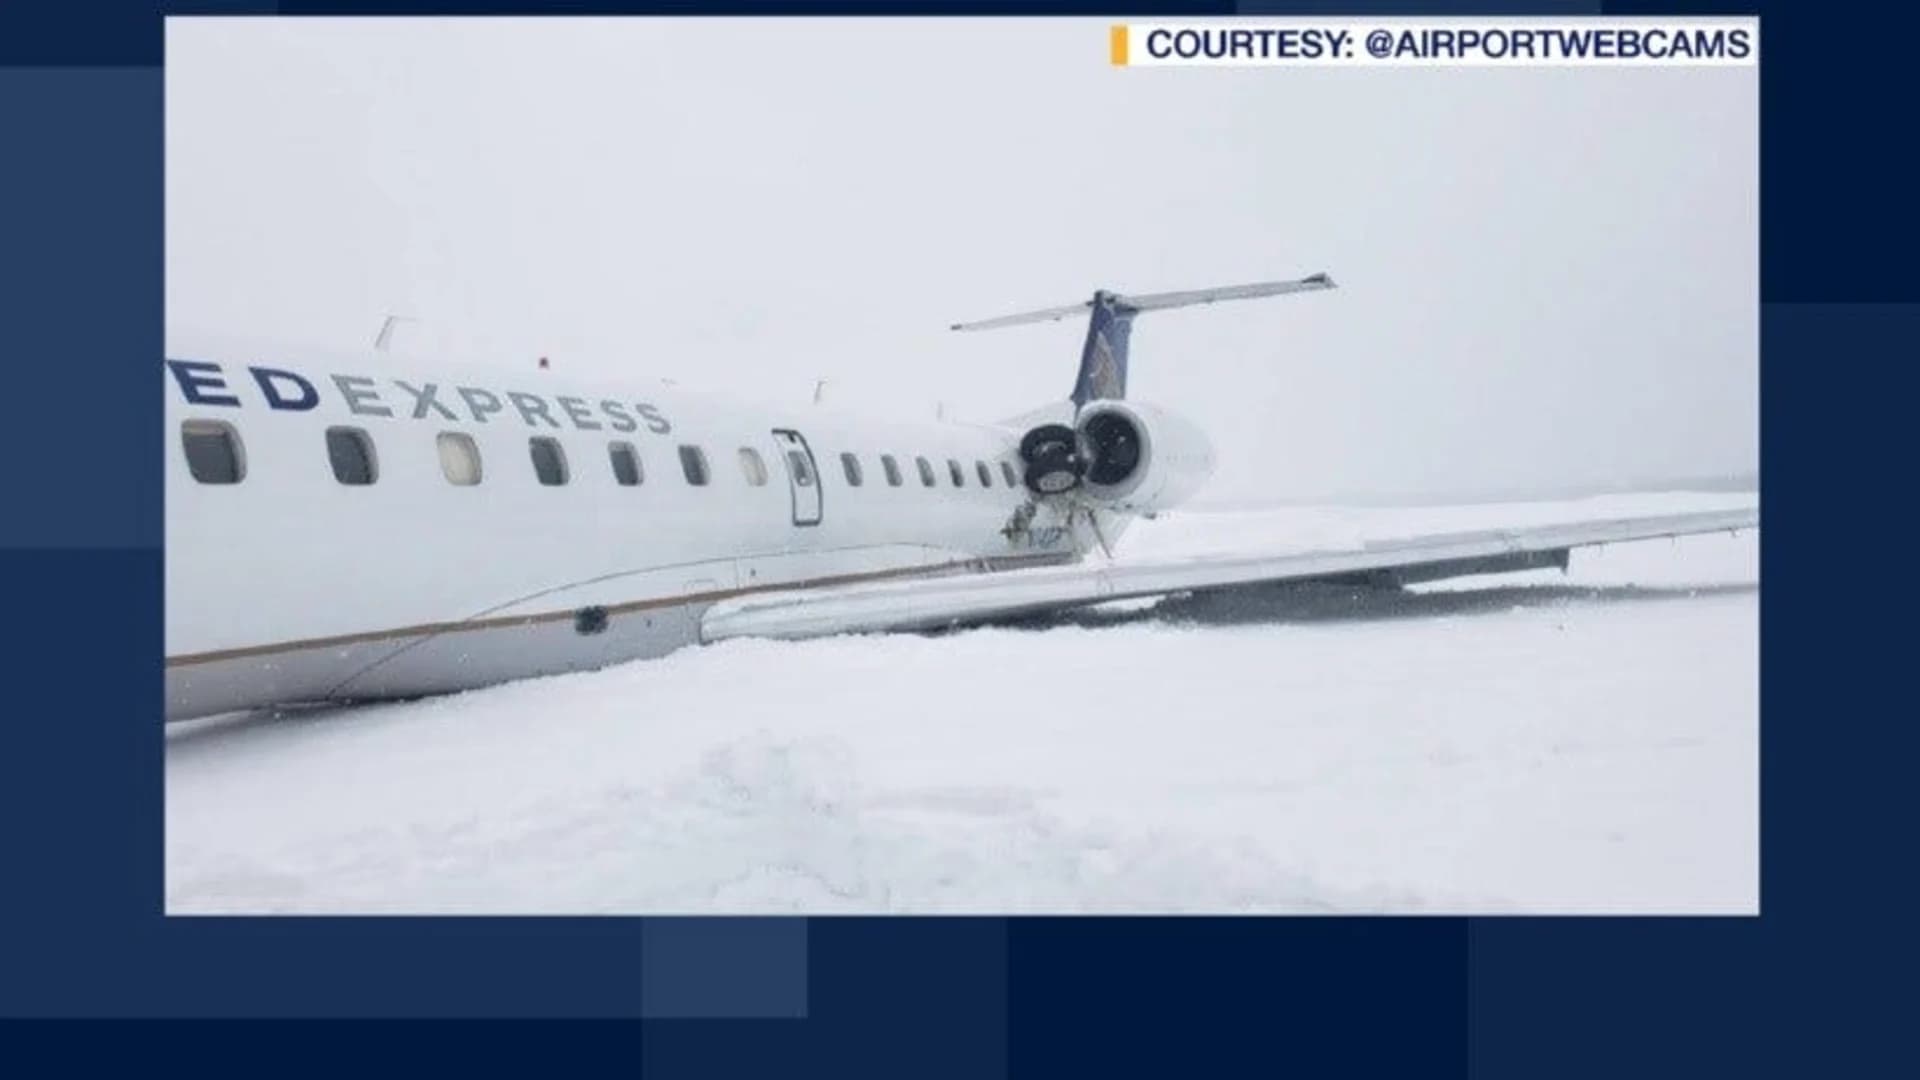 Officials: Jet from Newark airport slides off runway in Maine; multiple injuries reported